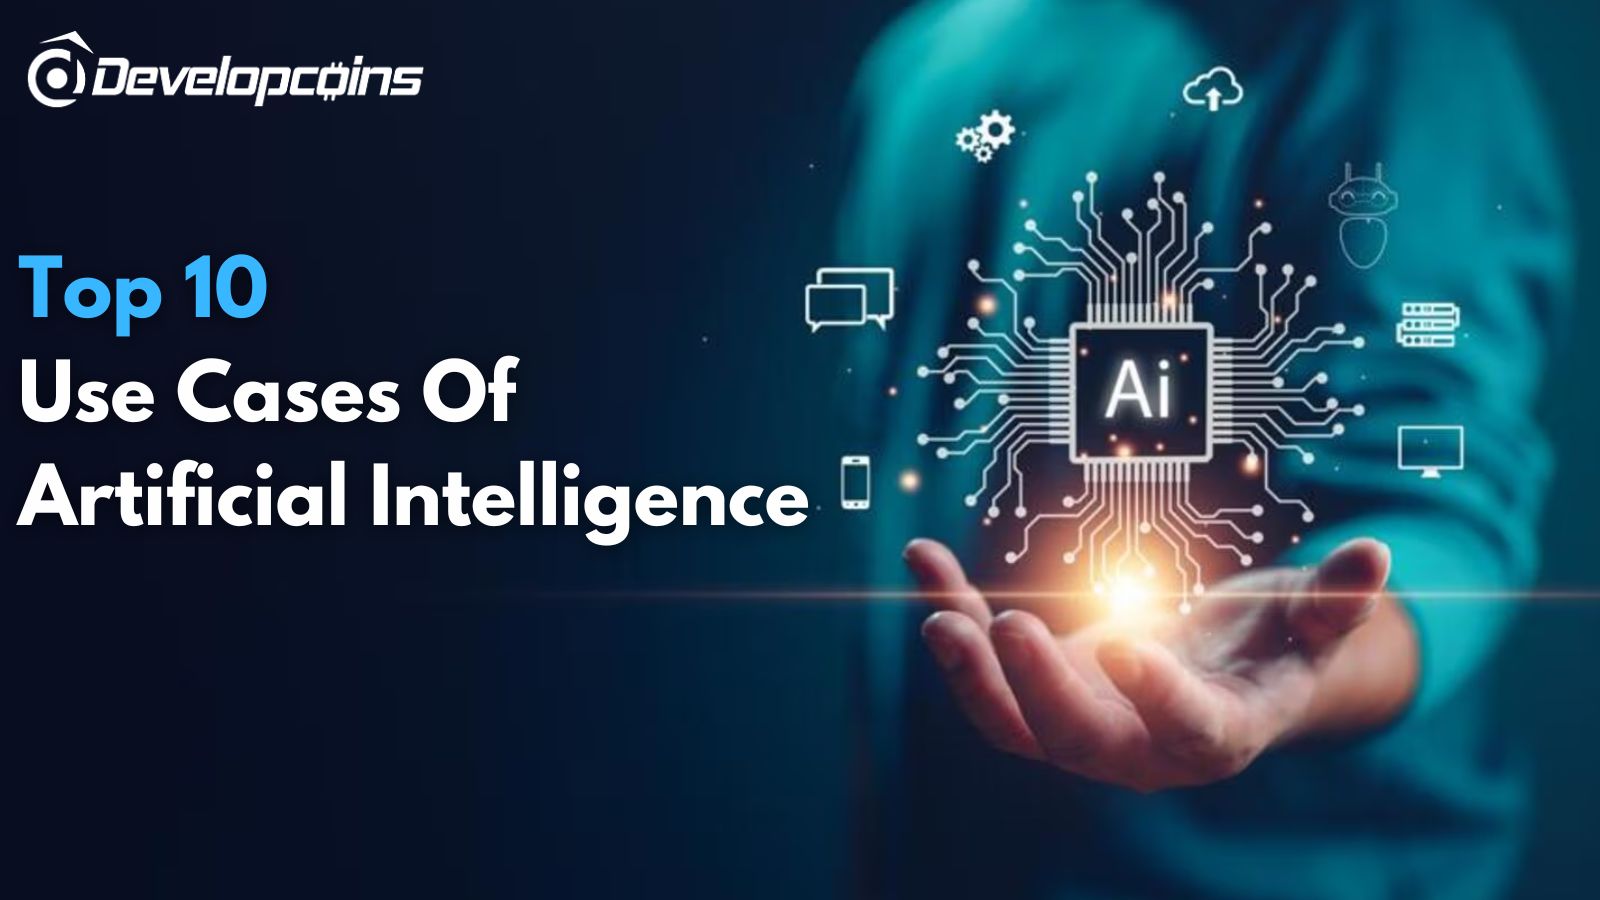 Unleashing The Power Of Artificial Intelligence: Top 10 Use Cases Of AI In The Real World